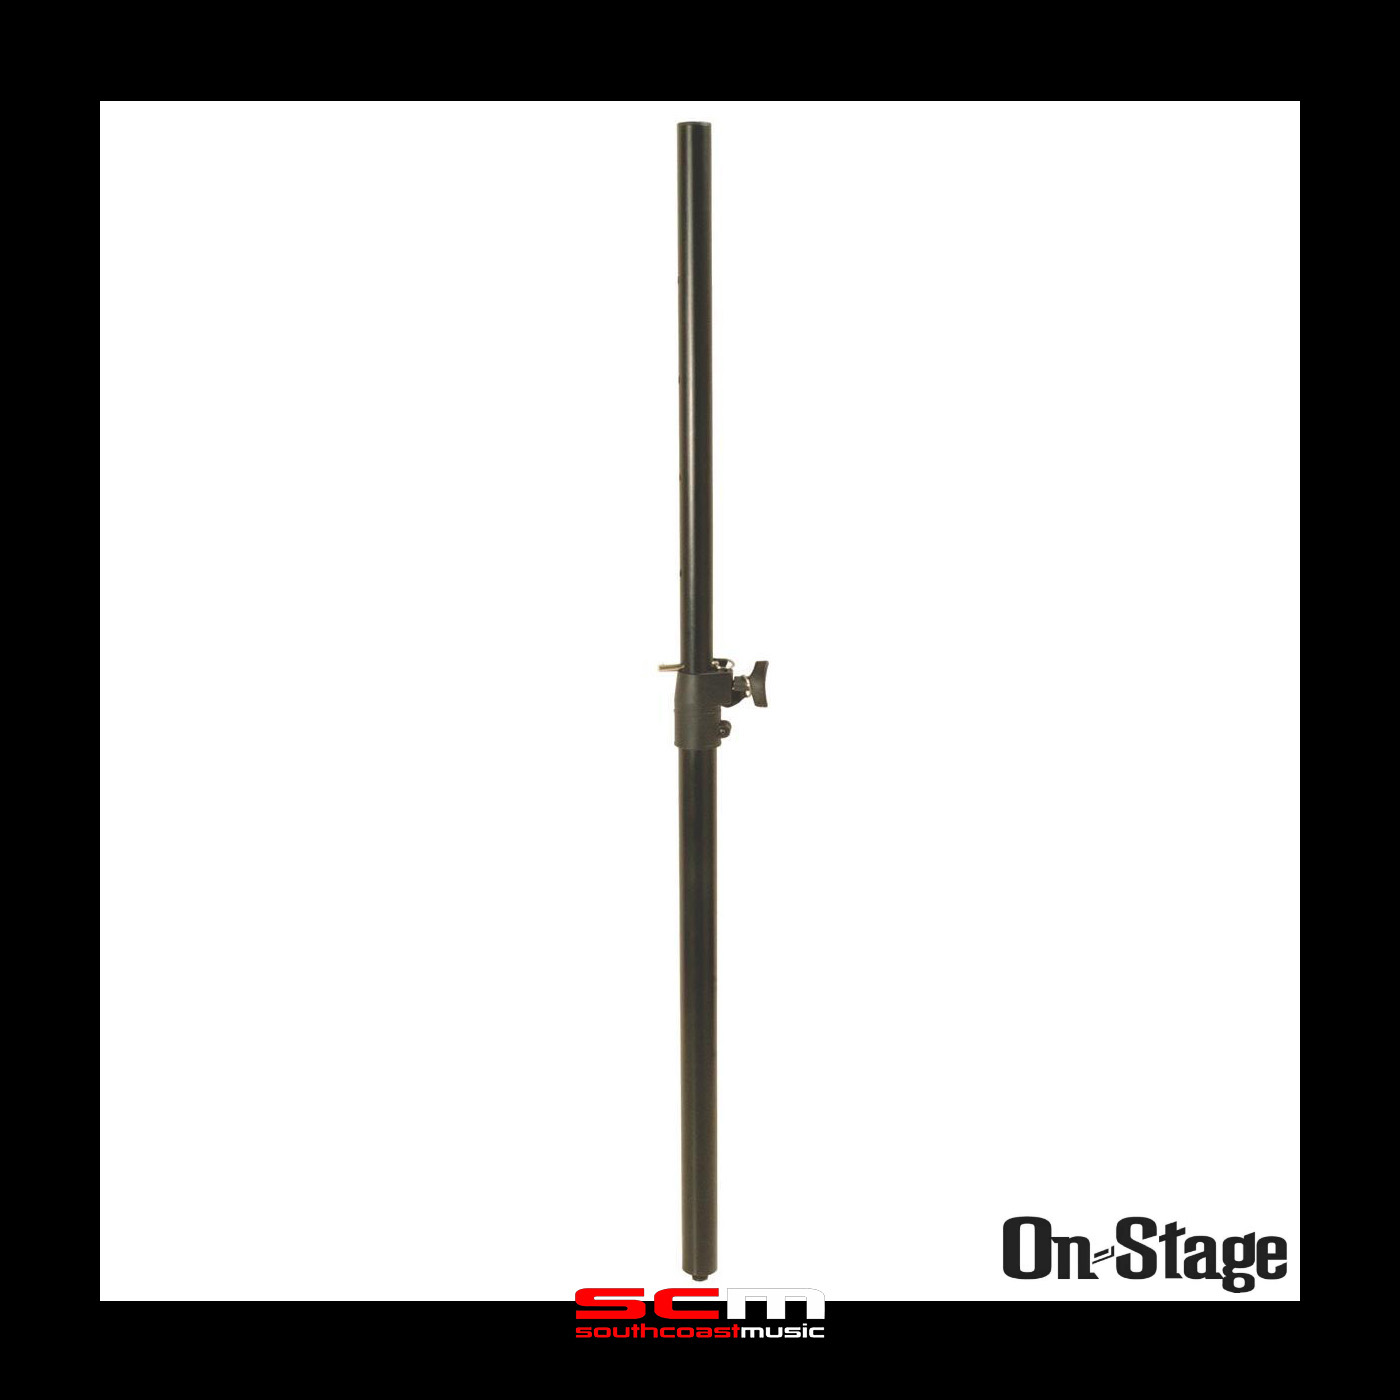 On-Stage SS7746 Subwoofer Pole with M20 Thread - Black Finish